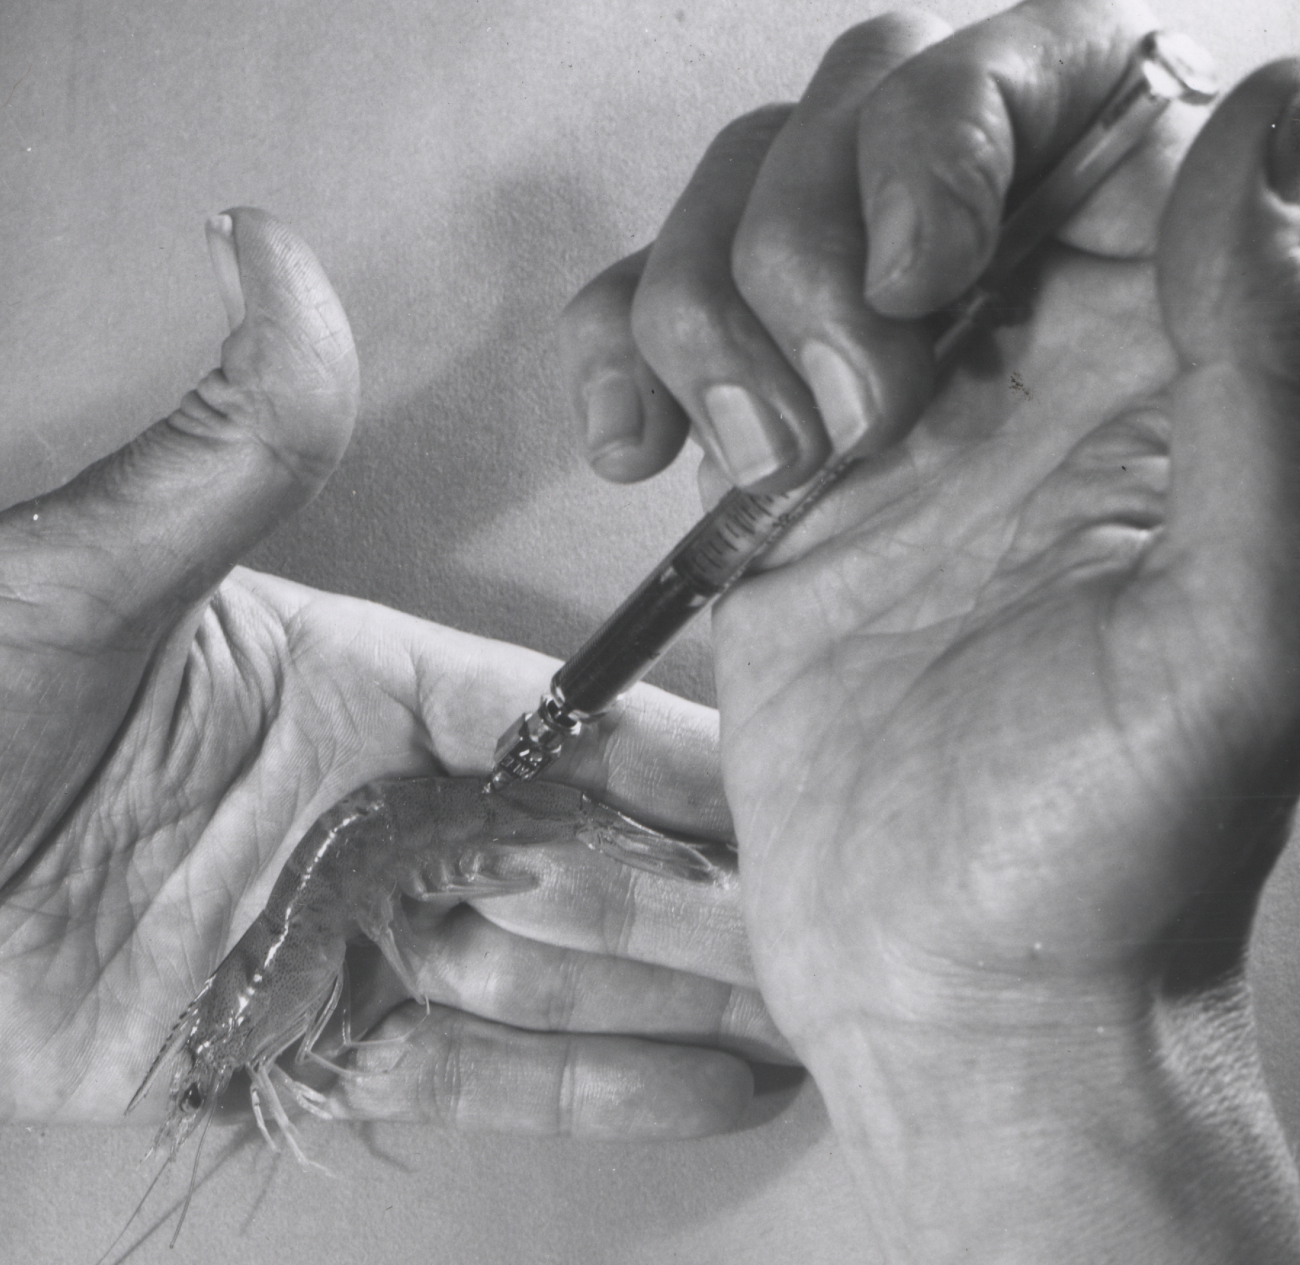 Injecting biological stain into a shrimp with a hypodermic syringe